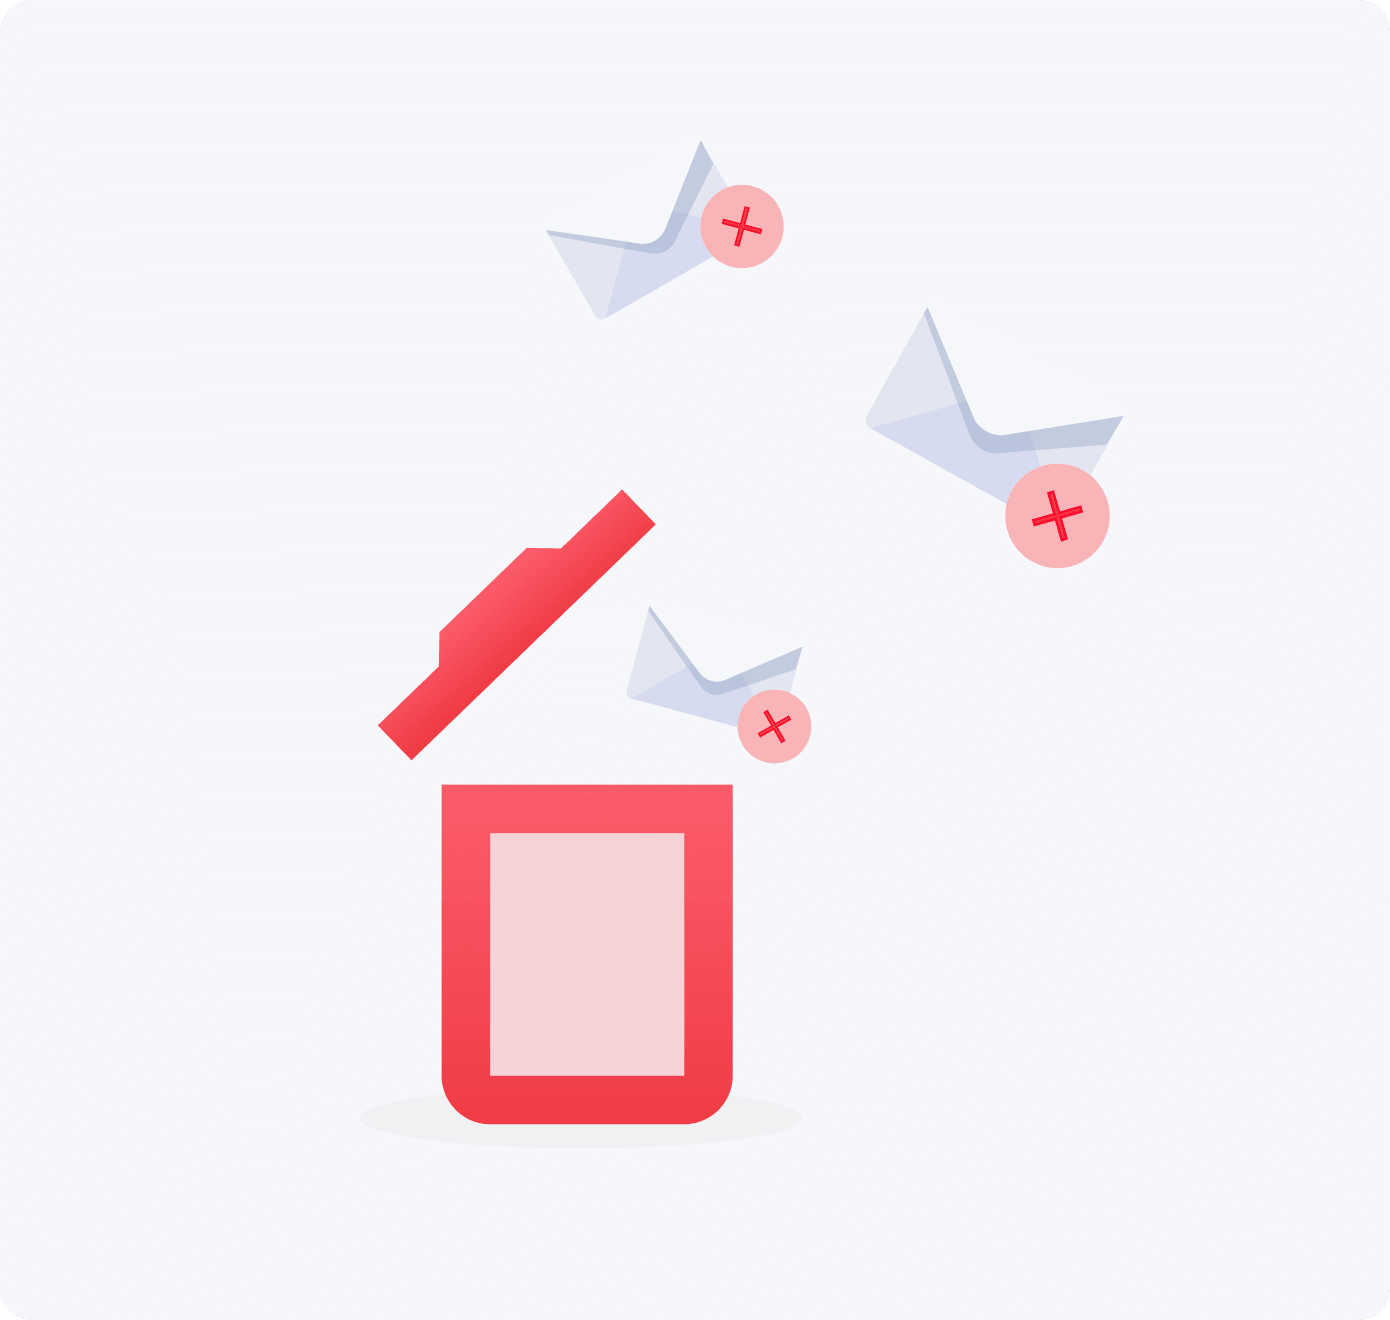 Reduce bounces with email validation